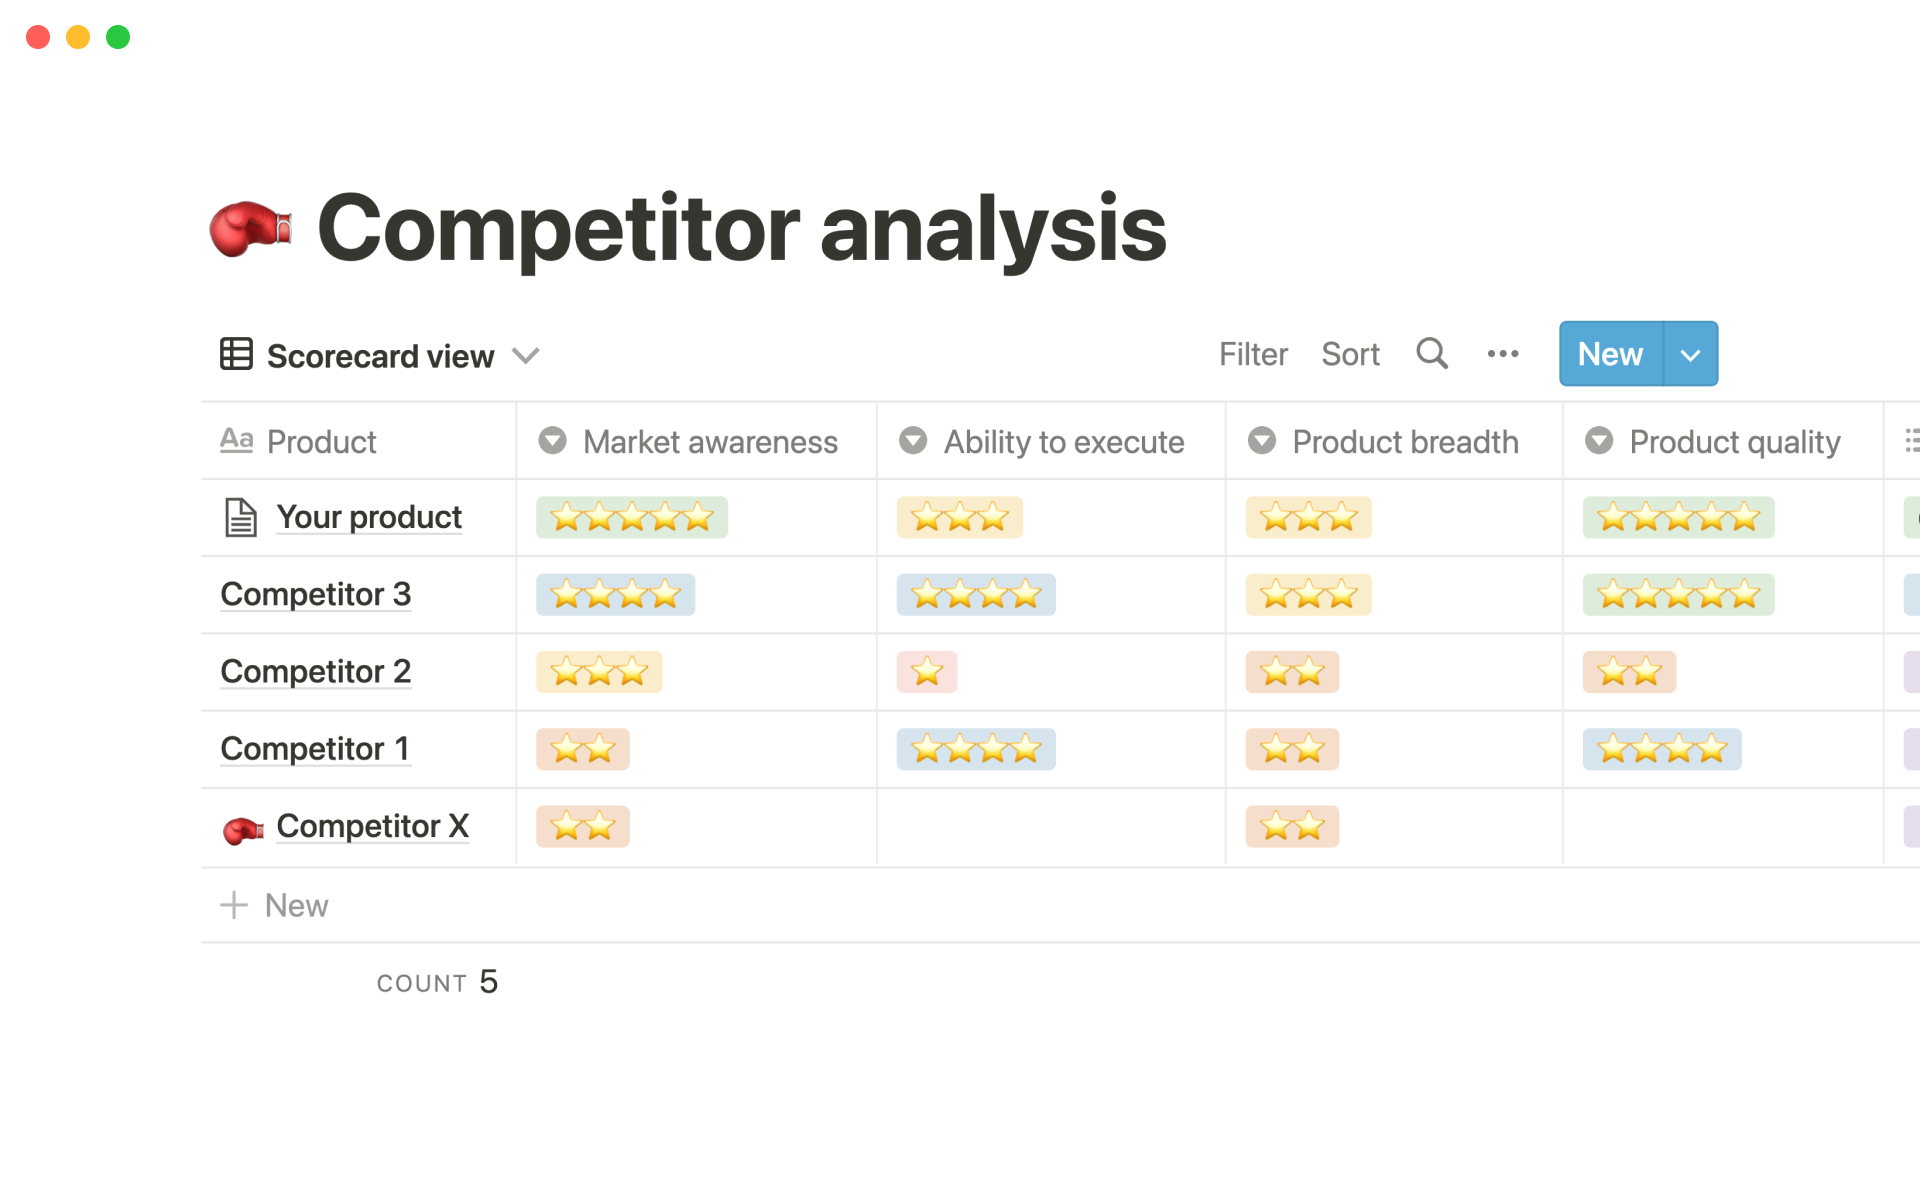 FREE Competitive Analysis Template (with Guide and Examples)